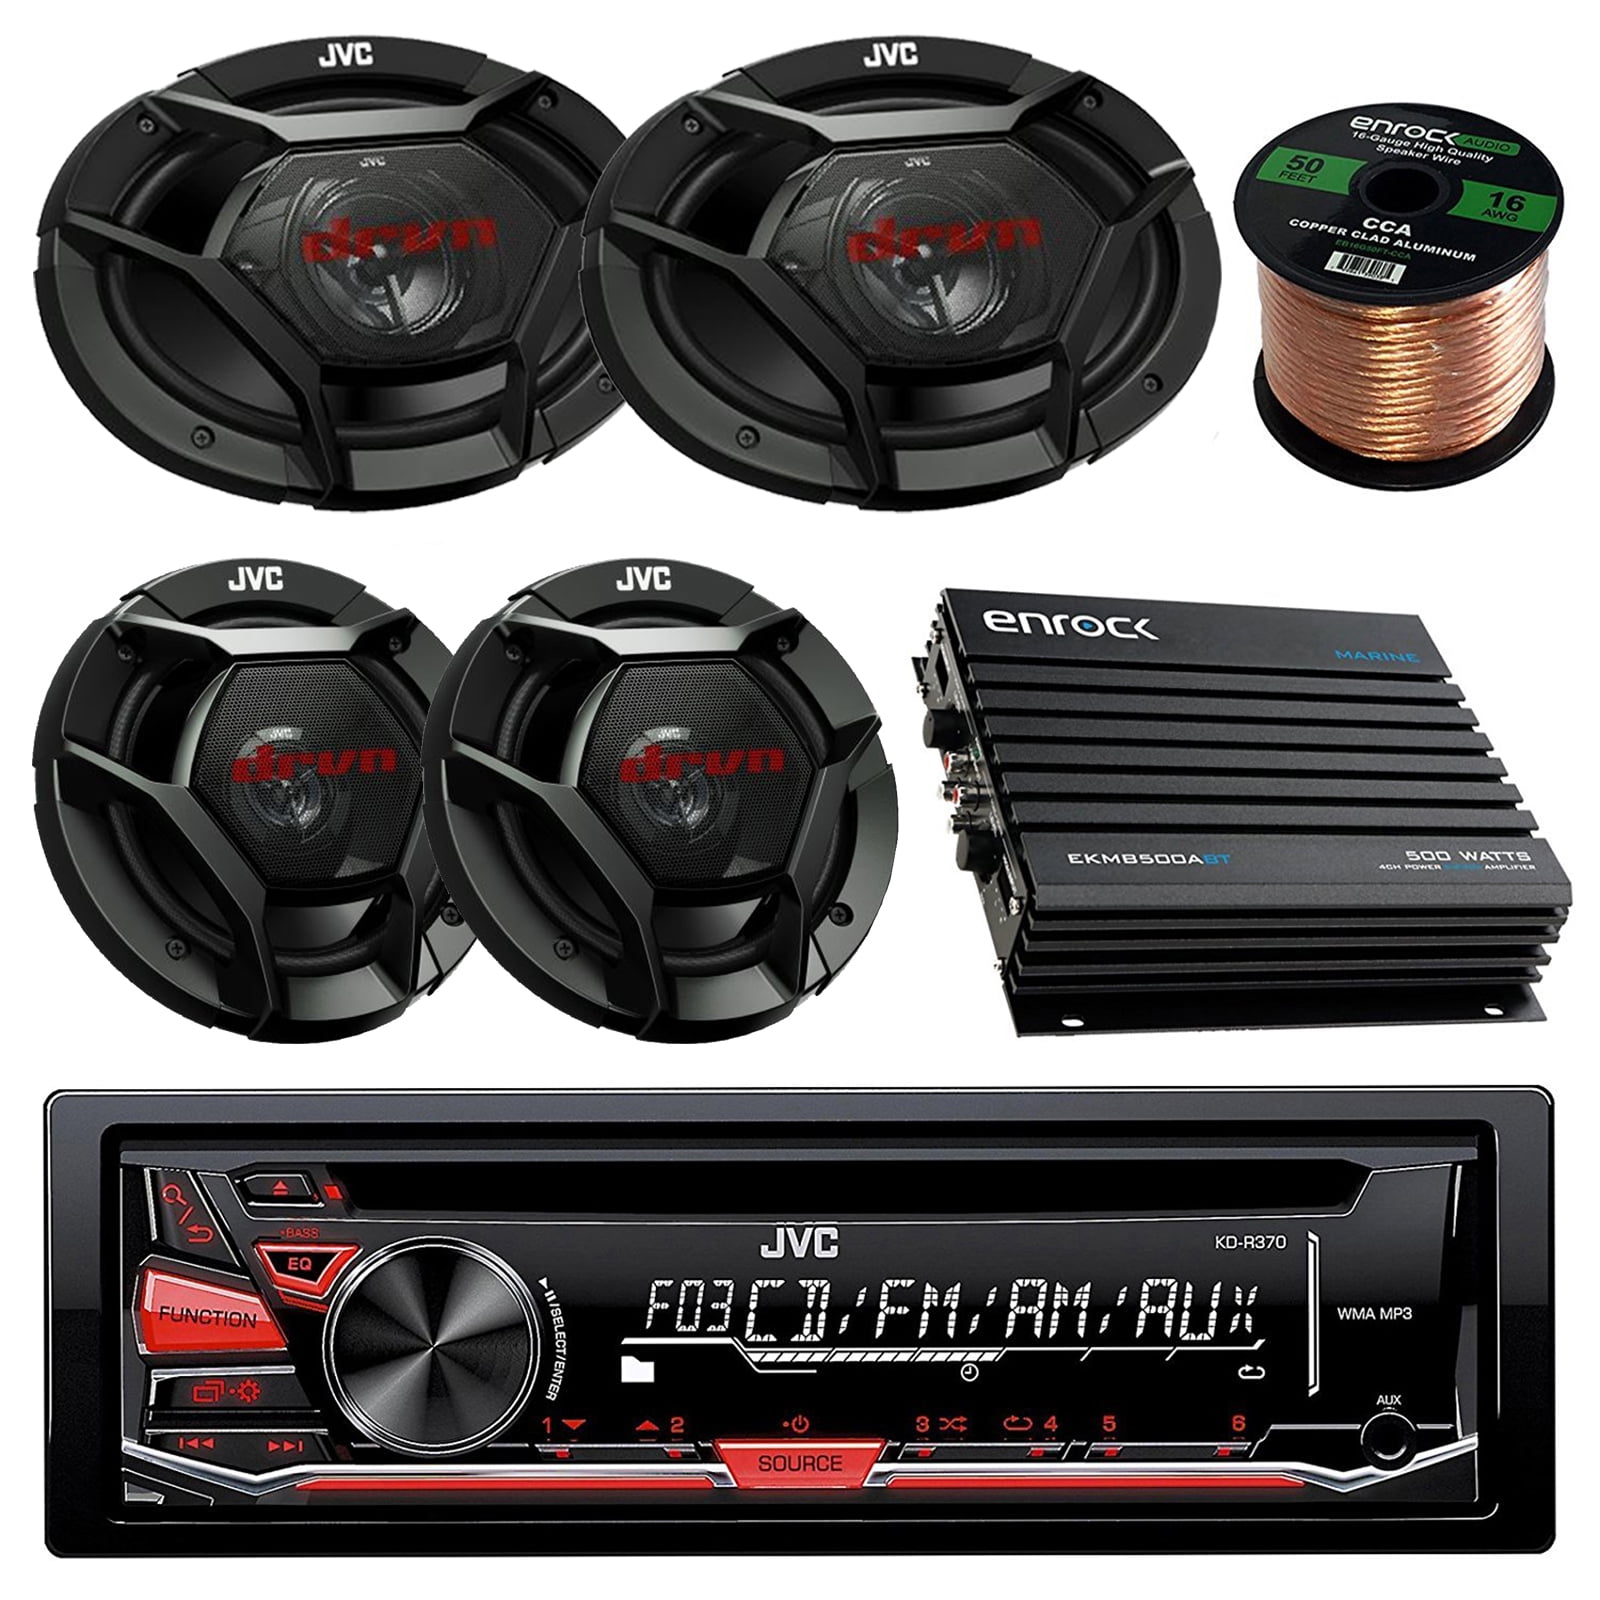 JVC KD-R670 CD MP3 WMA Player Stereo Receiver Bundle Combo With 4x JVC CS-DR620 6.5 Inch 300-Watt 2-Way Audio Coaxial Speakers Enrock 50 Foot 16 Guage Speaker Wire 